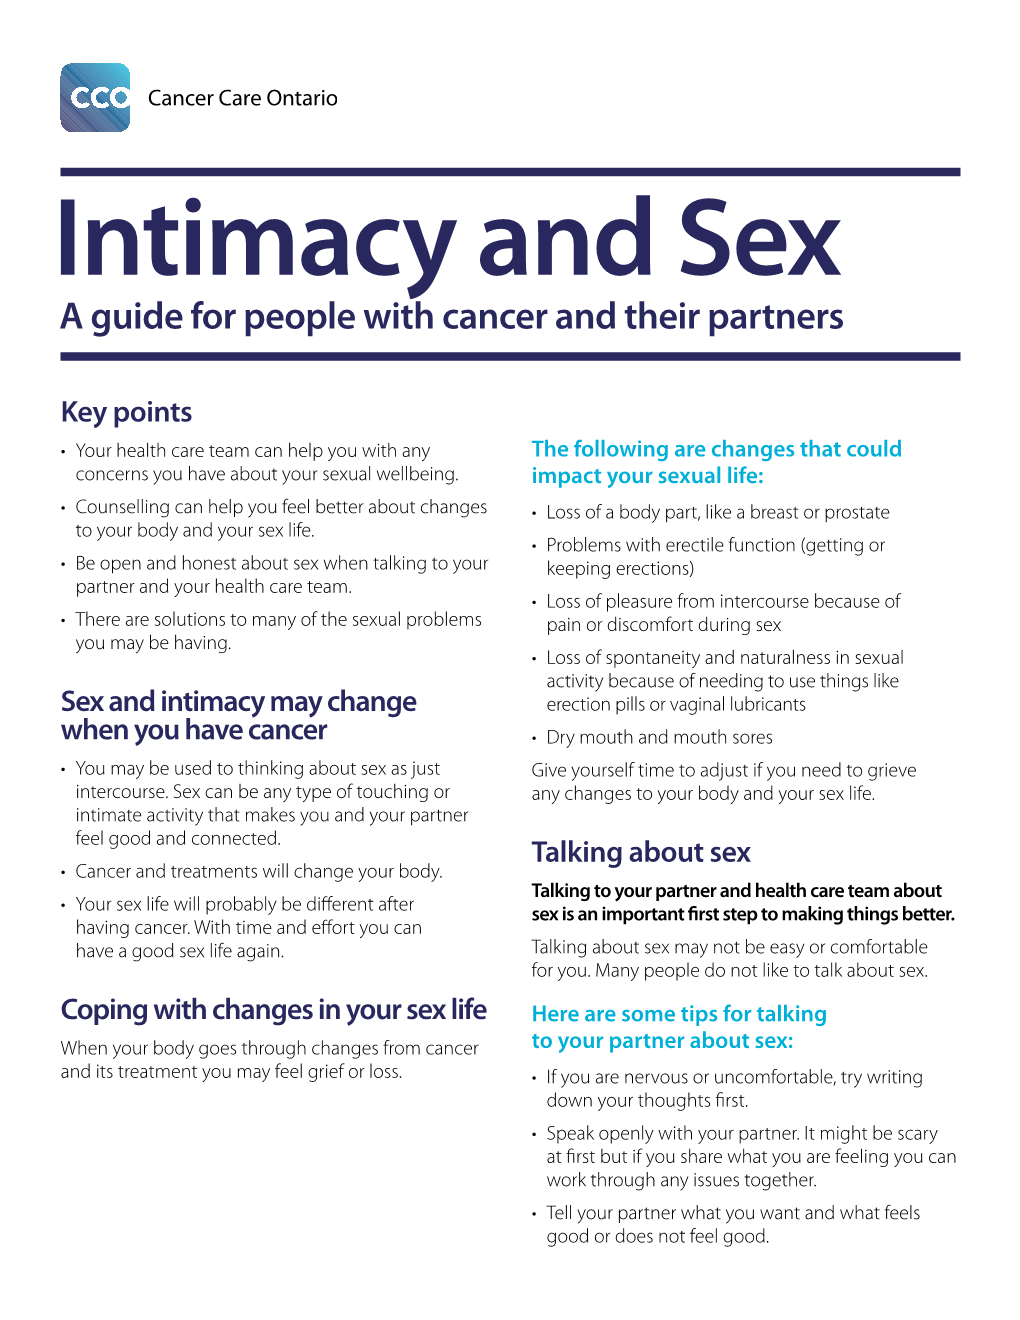 Intimacy and Sex: a Guide for People with Cancer and Their Partners